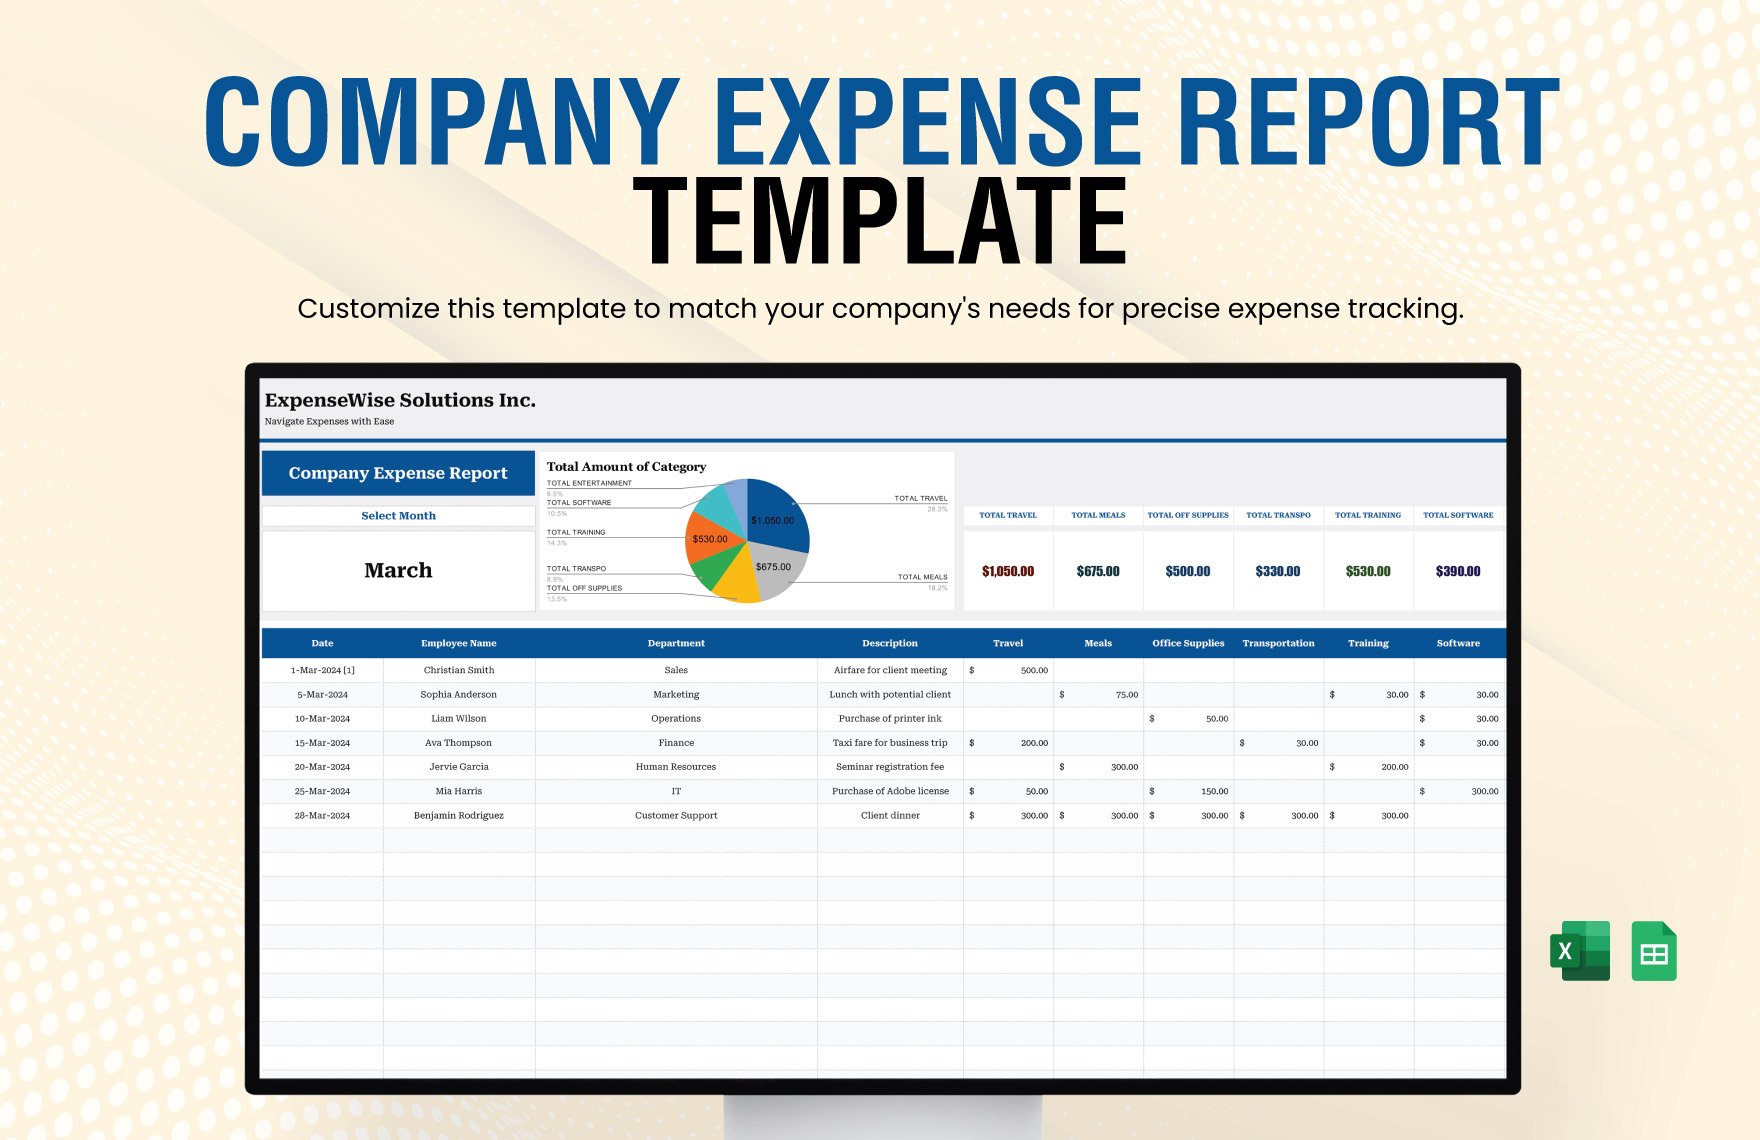 Company Expense Report Template in Excel, Google Sheets